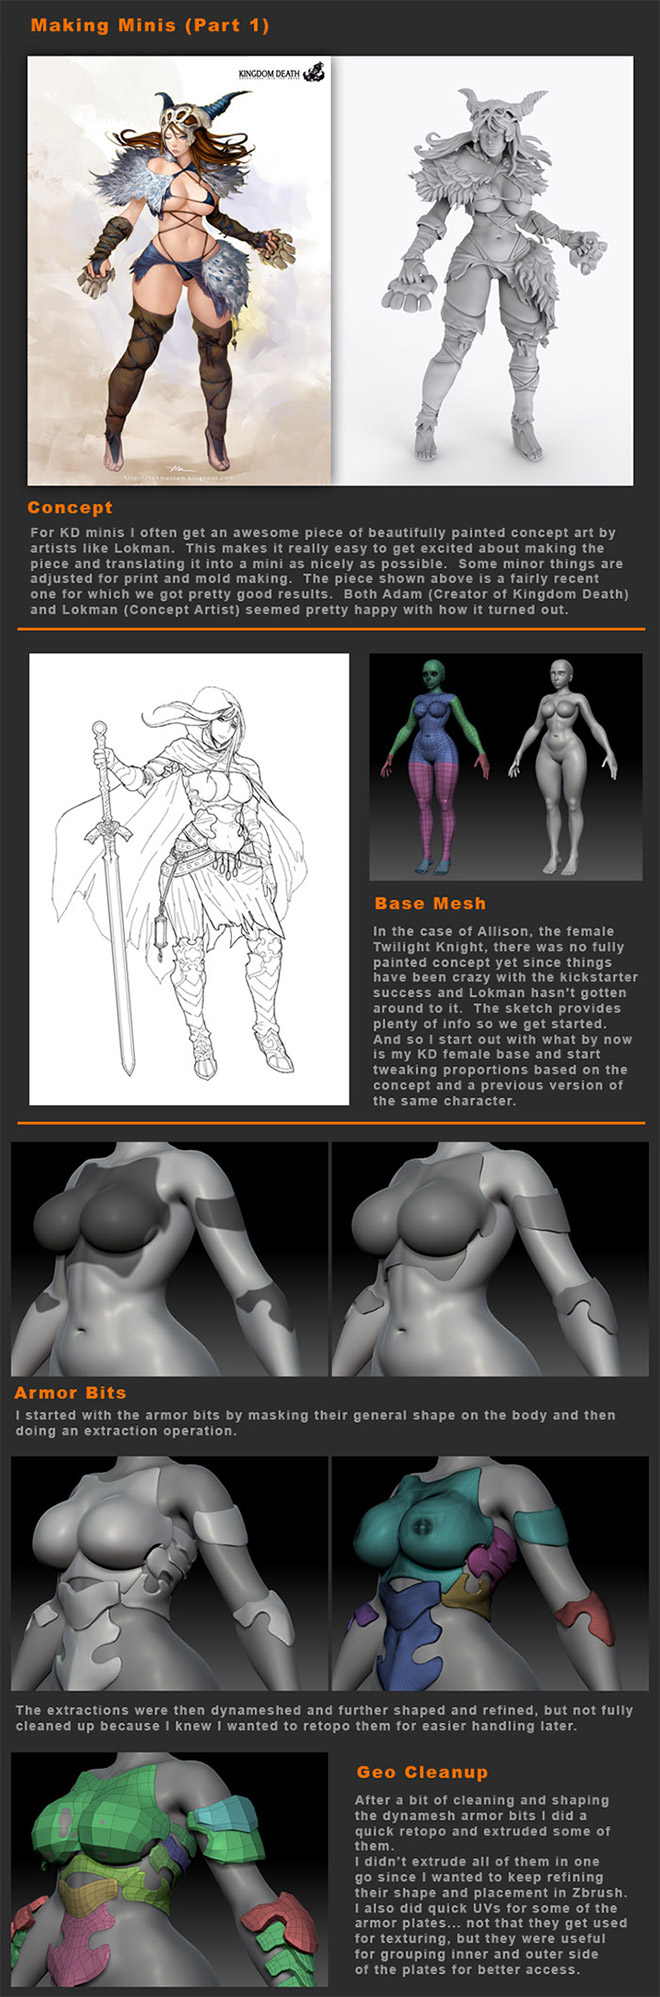 Making-of-Kingdom-Death-Minis-by-Hector-Moran1